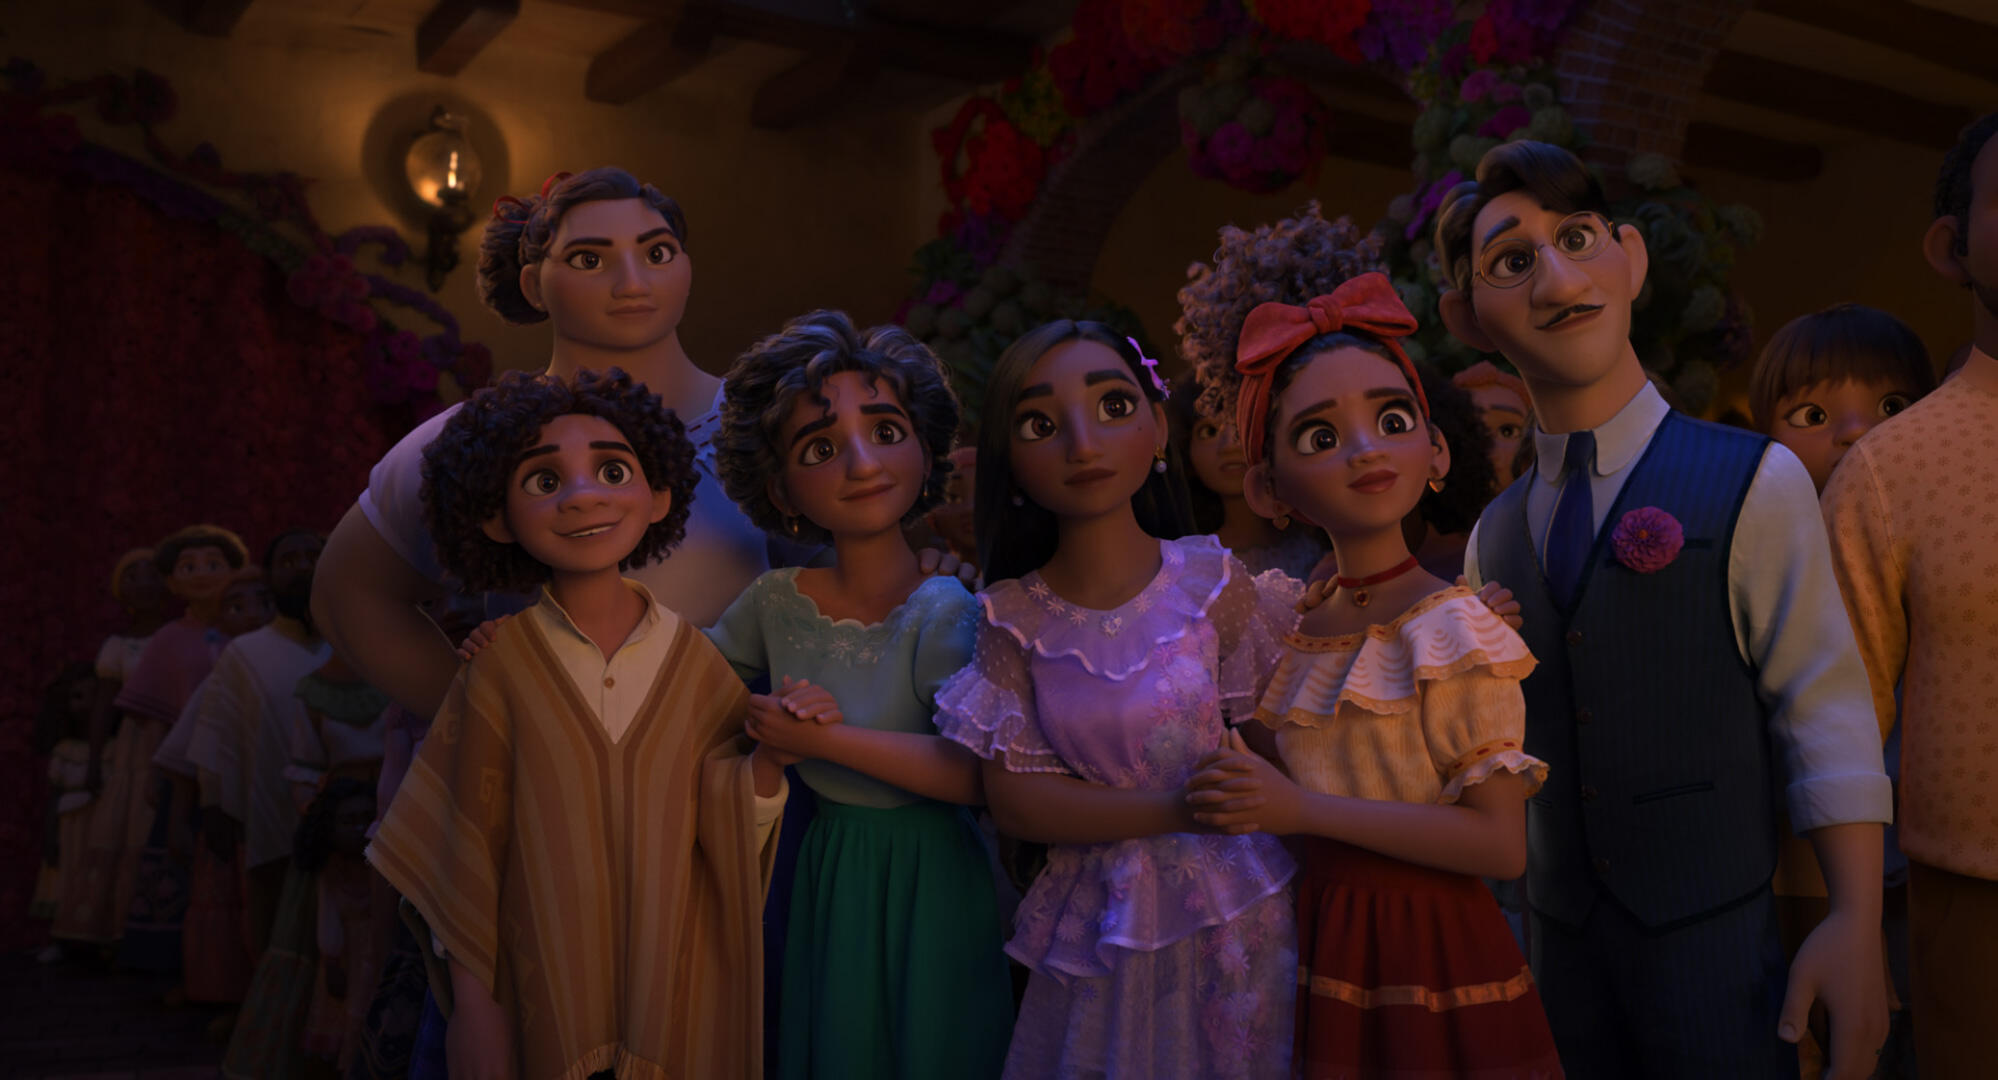 The Madrigals, Luisa, Camilo, Julieta, Isabela, Dolores and Agustín, stand together looking at something off screen. 